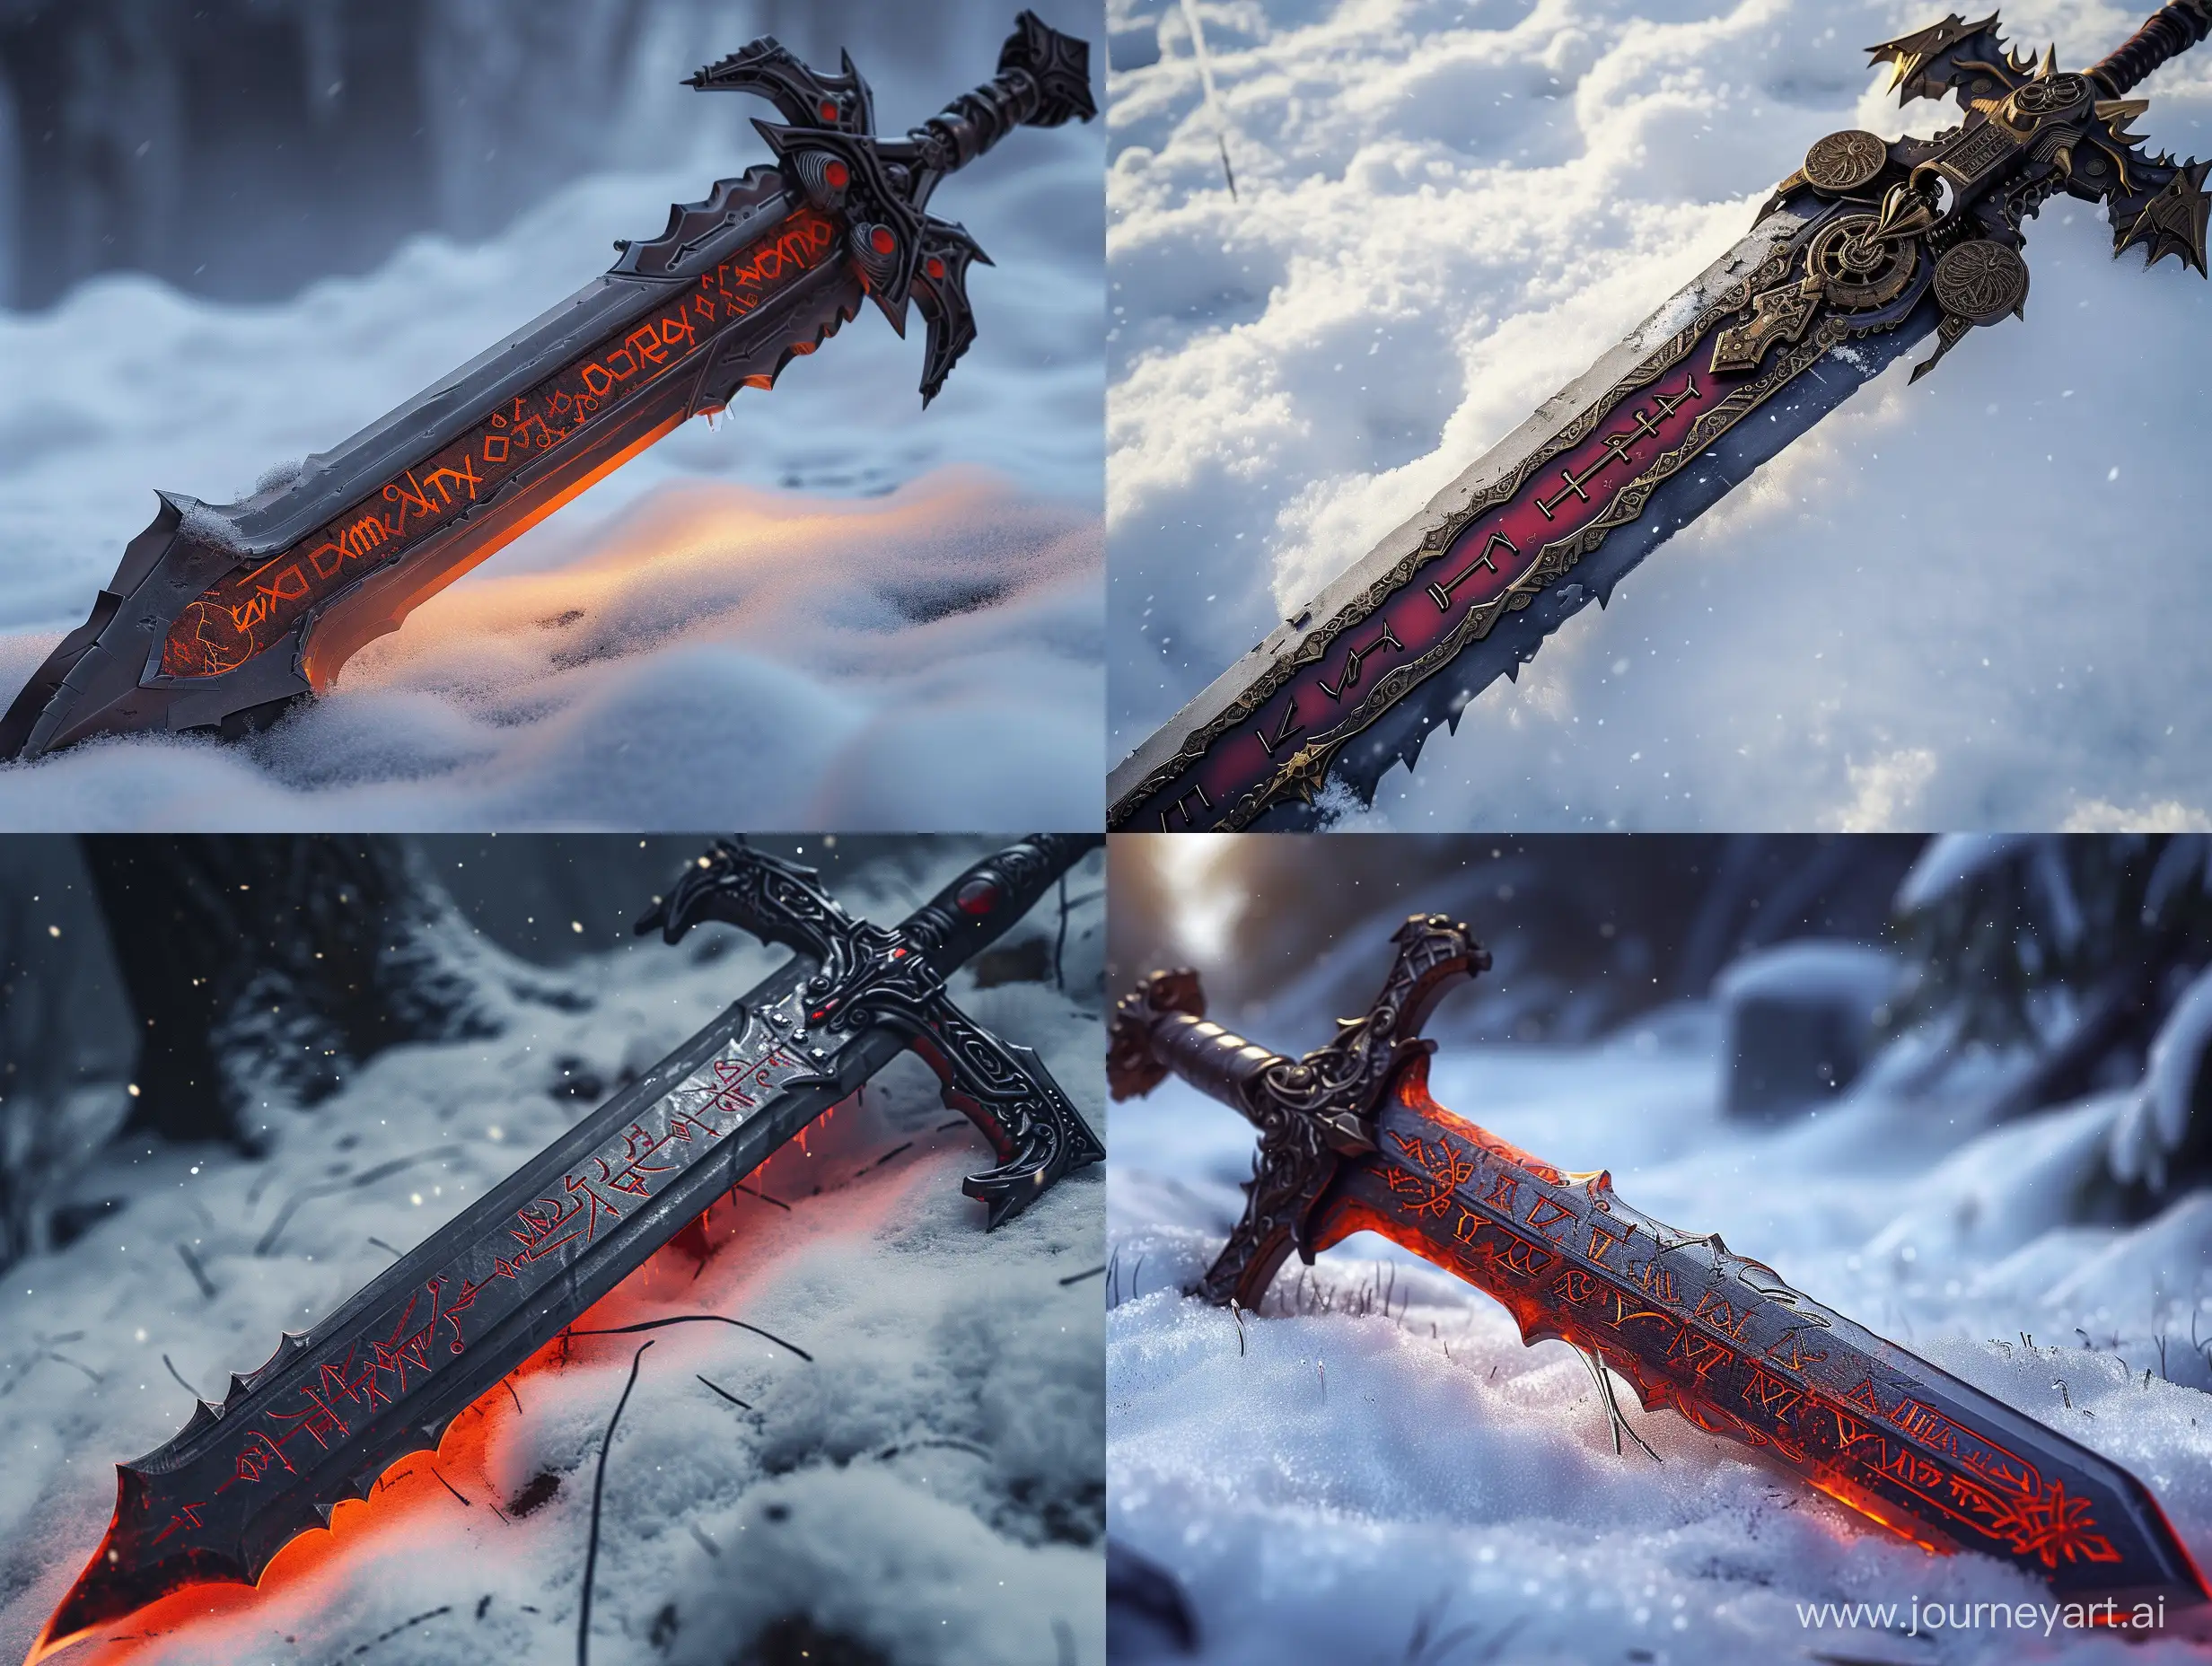 Terrifying-Red-Queen-Sword-with-Runic-Letters-in-a-Steampunk-Snow-Scene